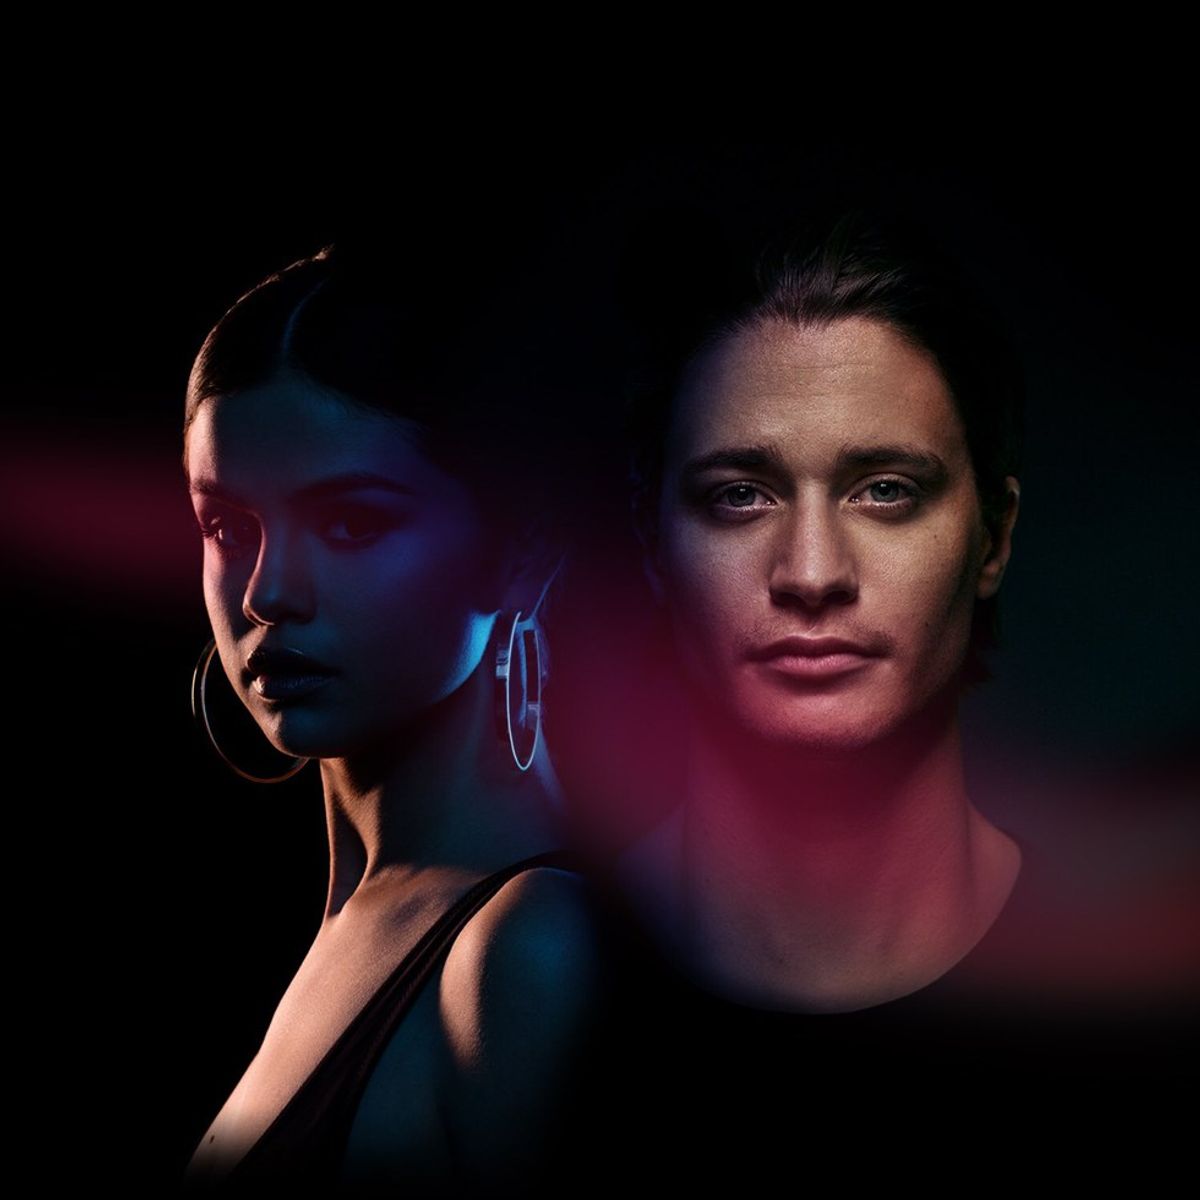 Kygo and Selena Gomez Make Beautiful EDM Together on “It Ain’t Me” Release